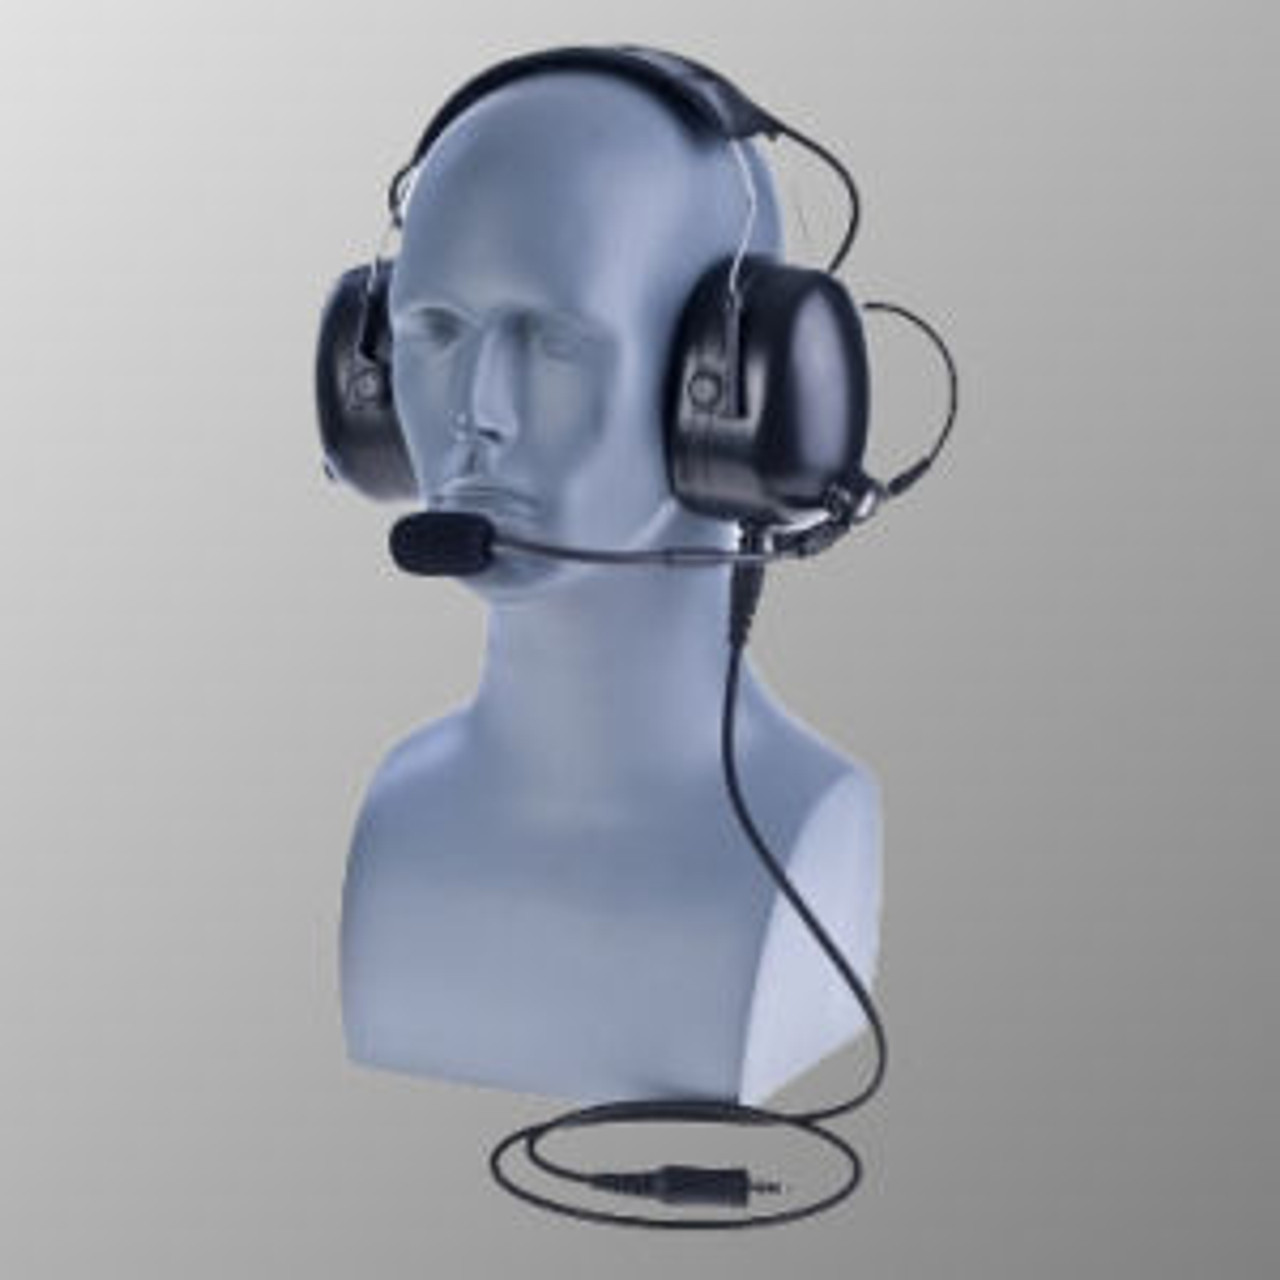 Relm RPU416 Over The Head Double Muff Headset